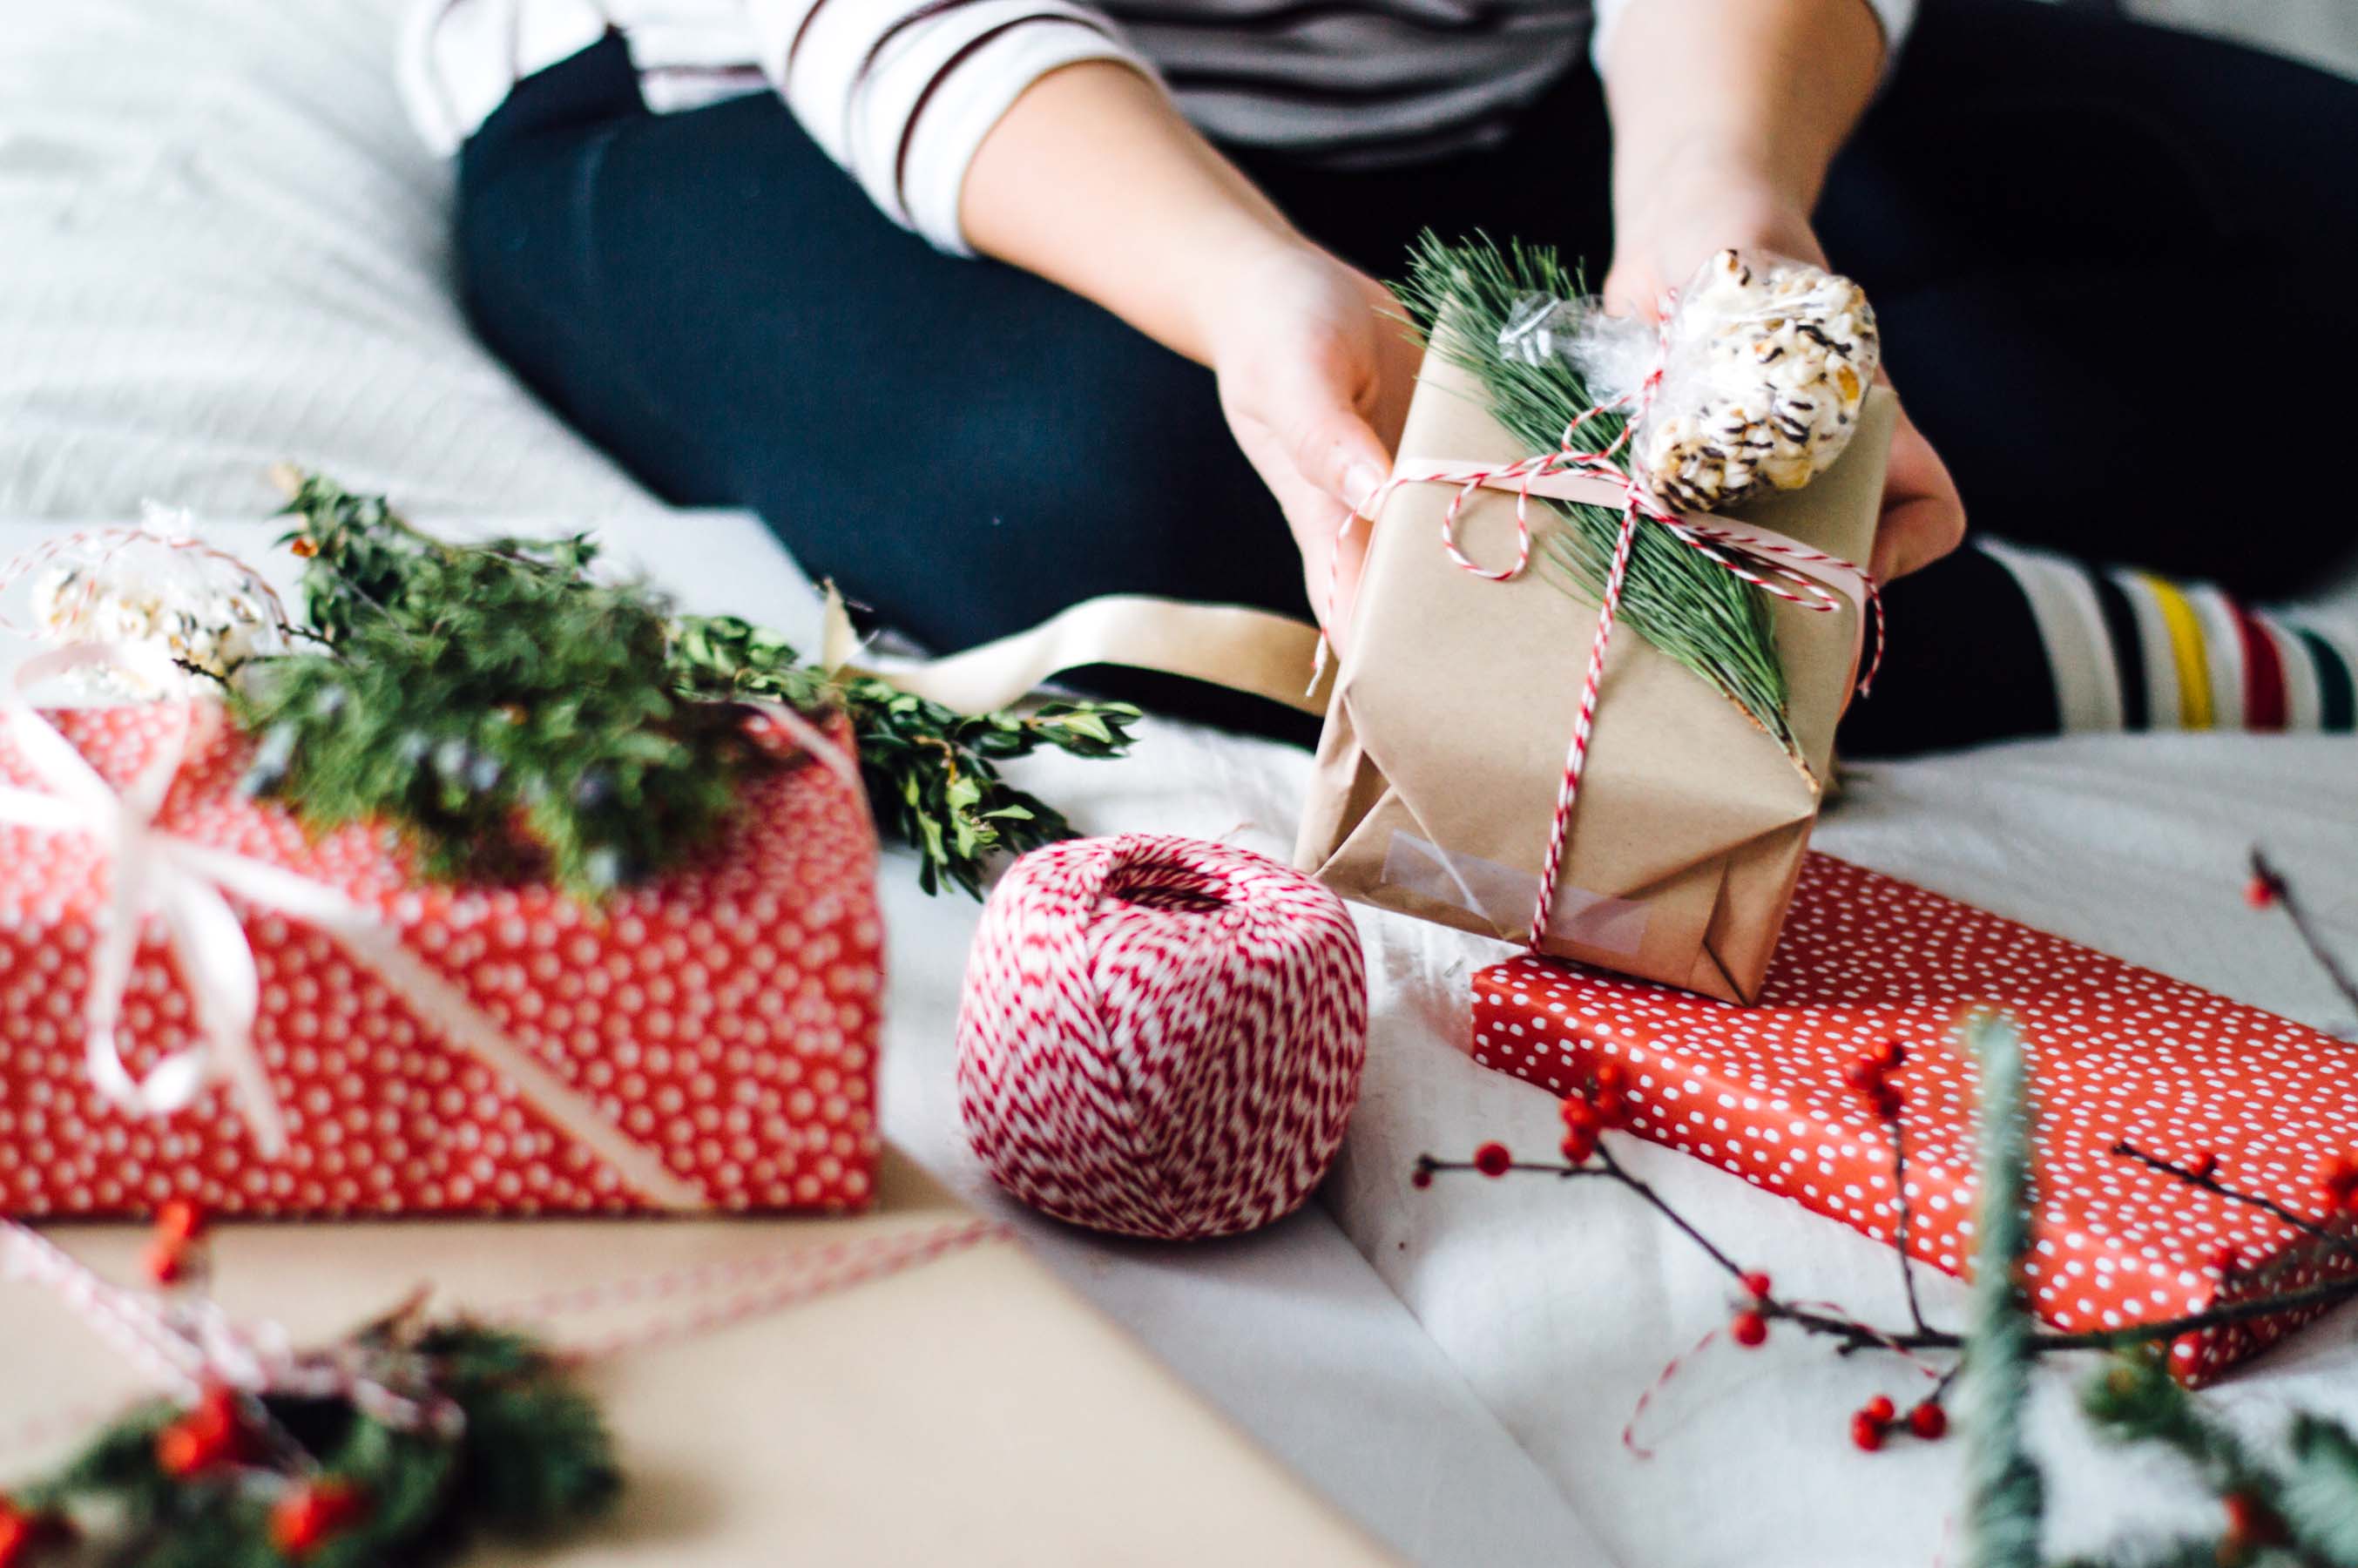 Still need to wrap up all your gifts? Use these holiday gift wrapping tips & tricks from @gabivalladares | bygabriella.co